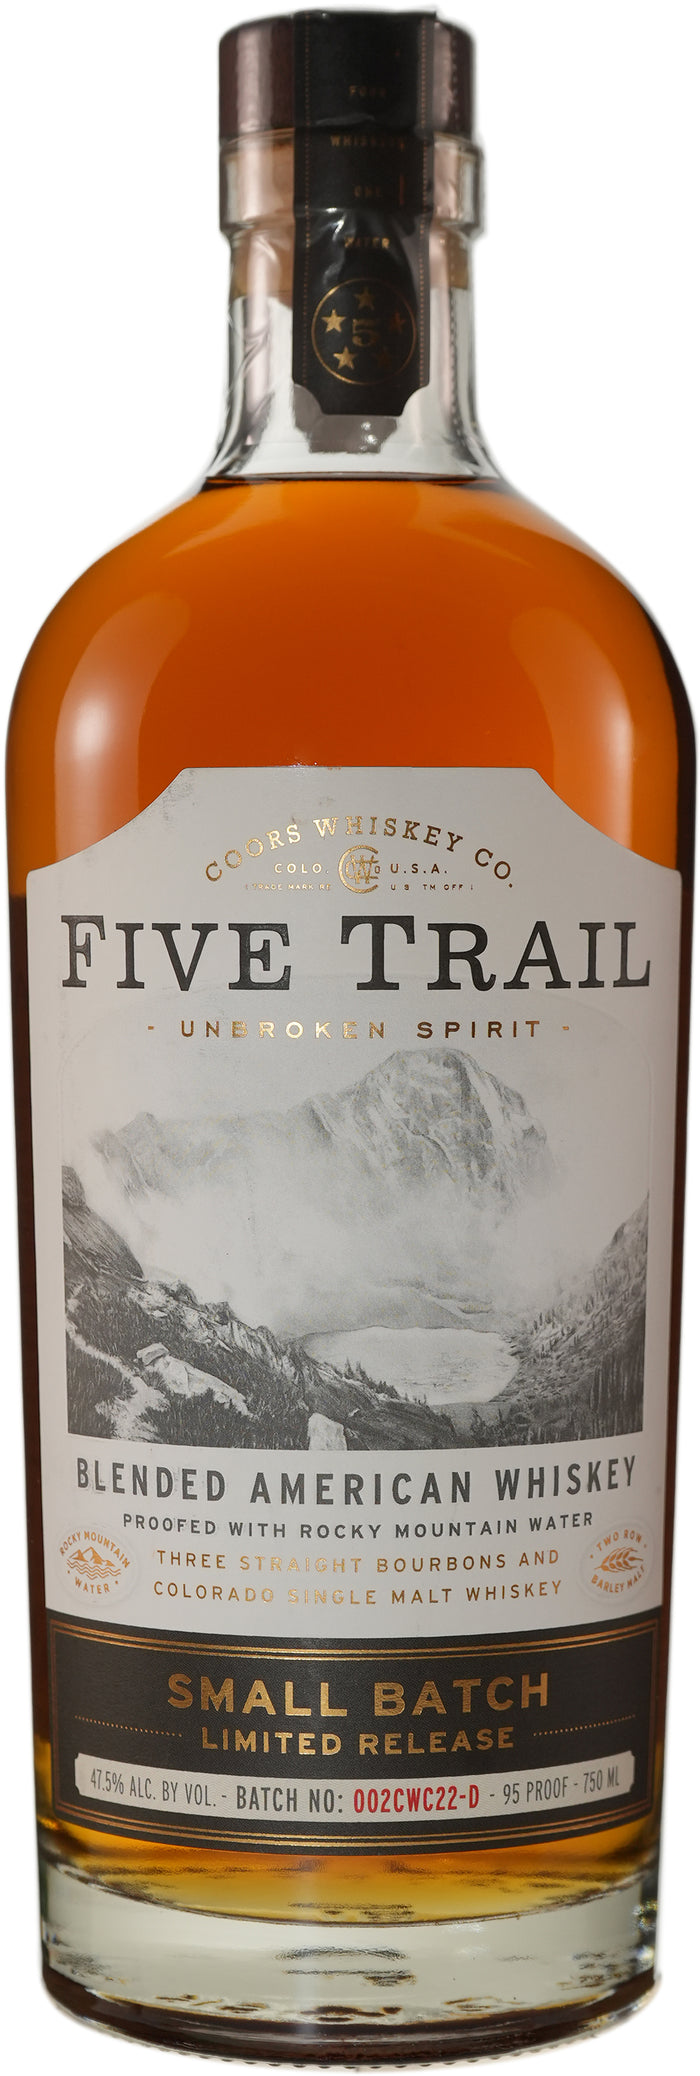 Five Trail Limited Small Batch Blended American Whiskey